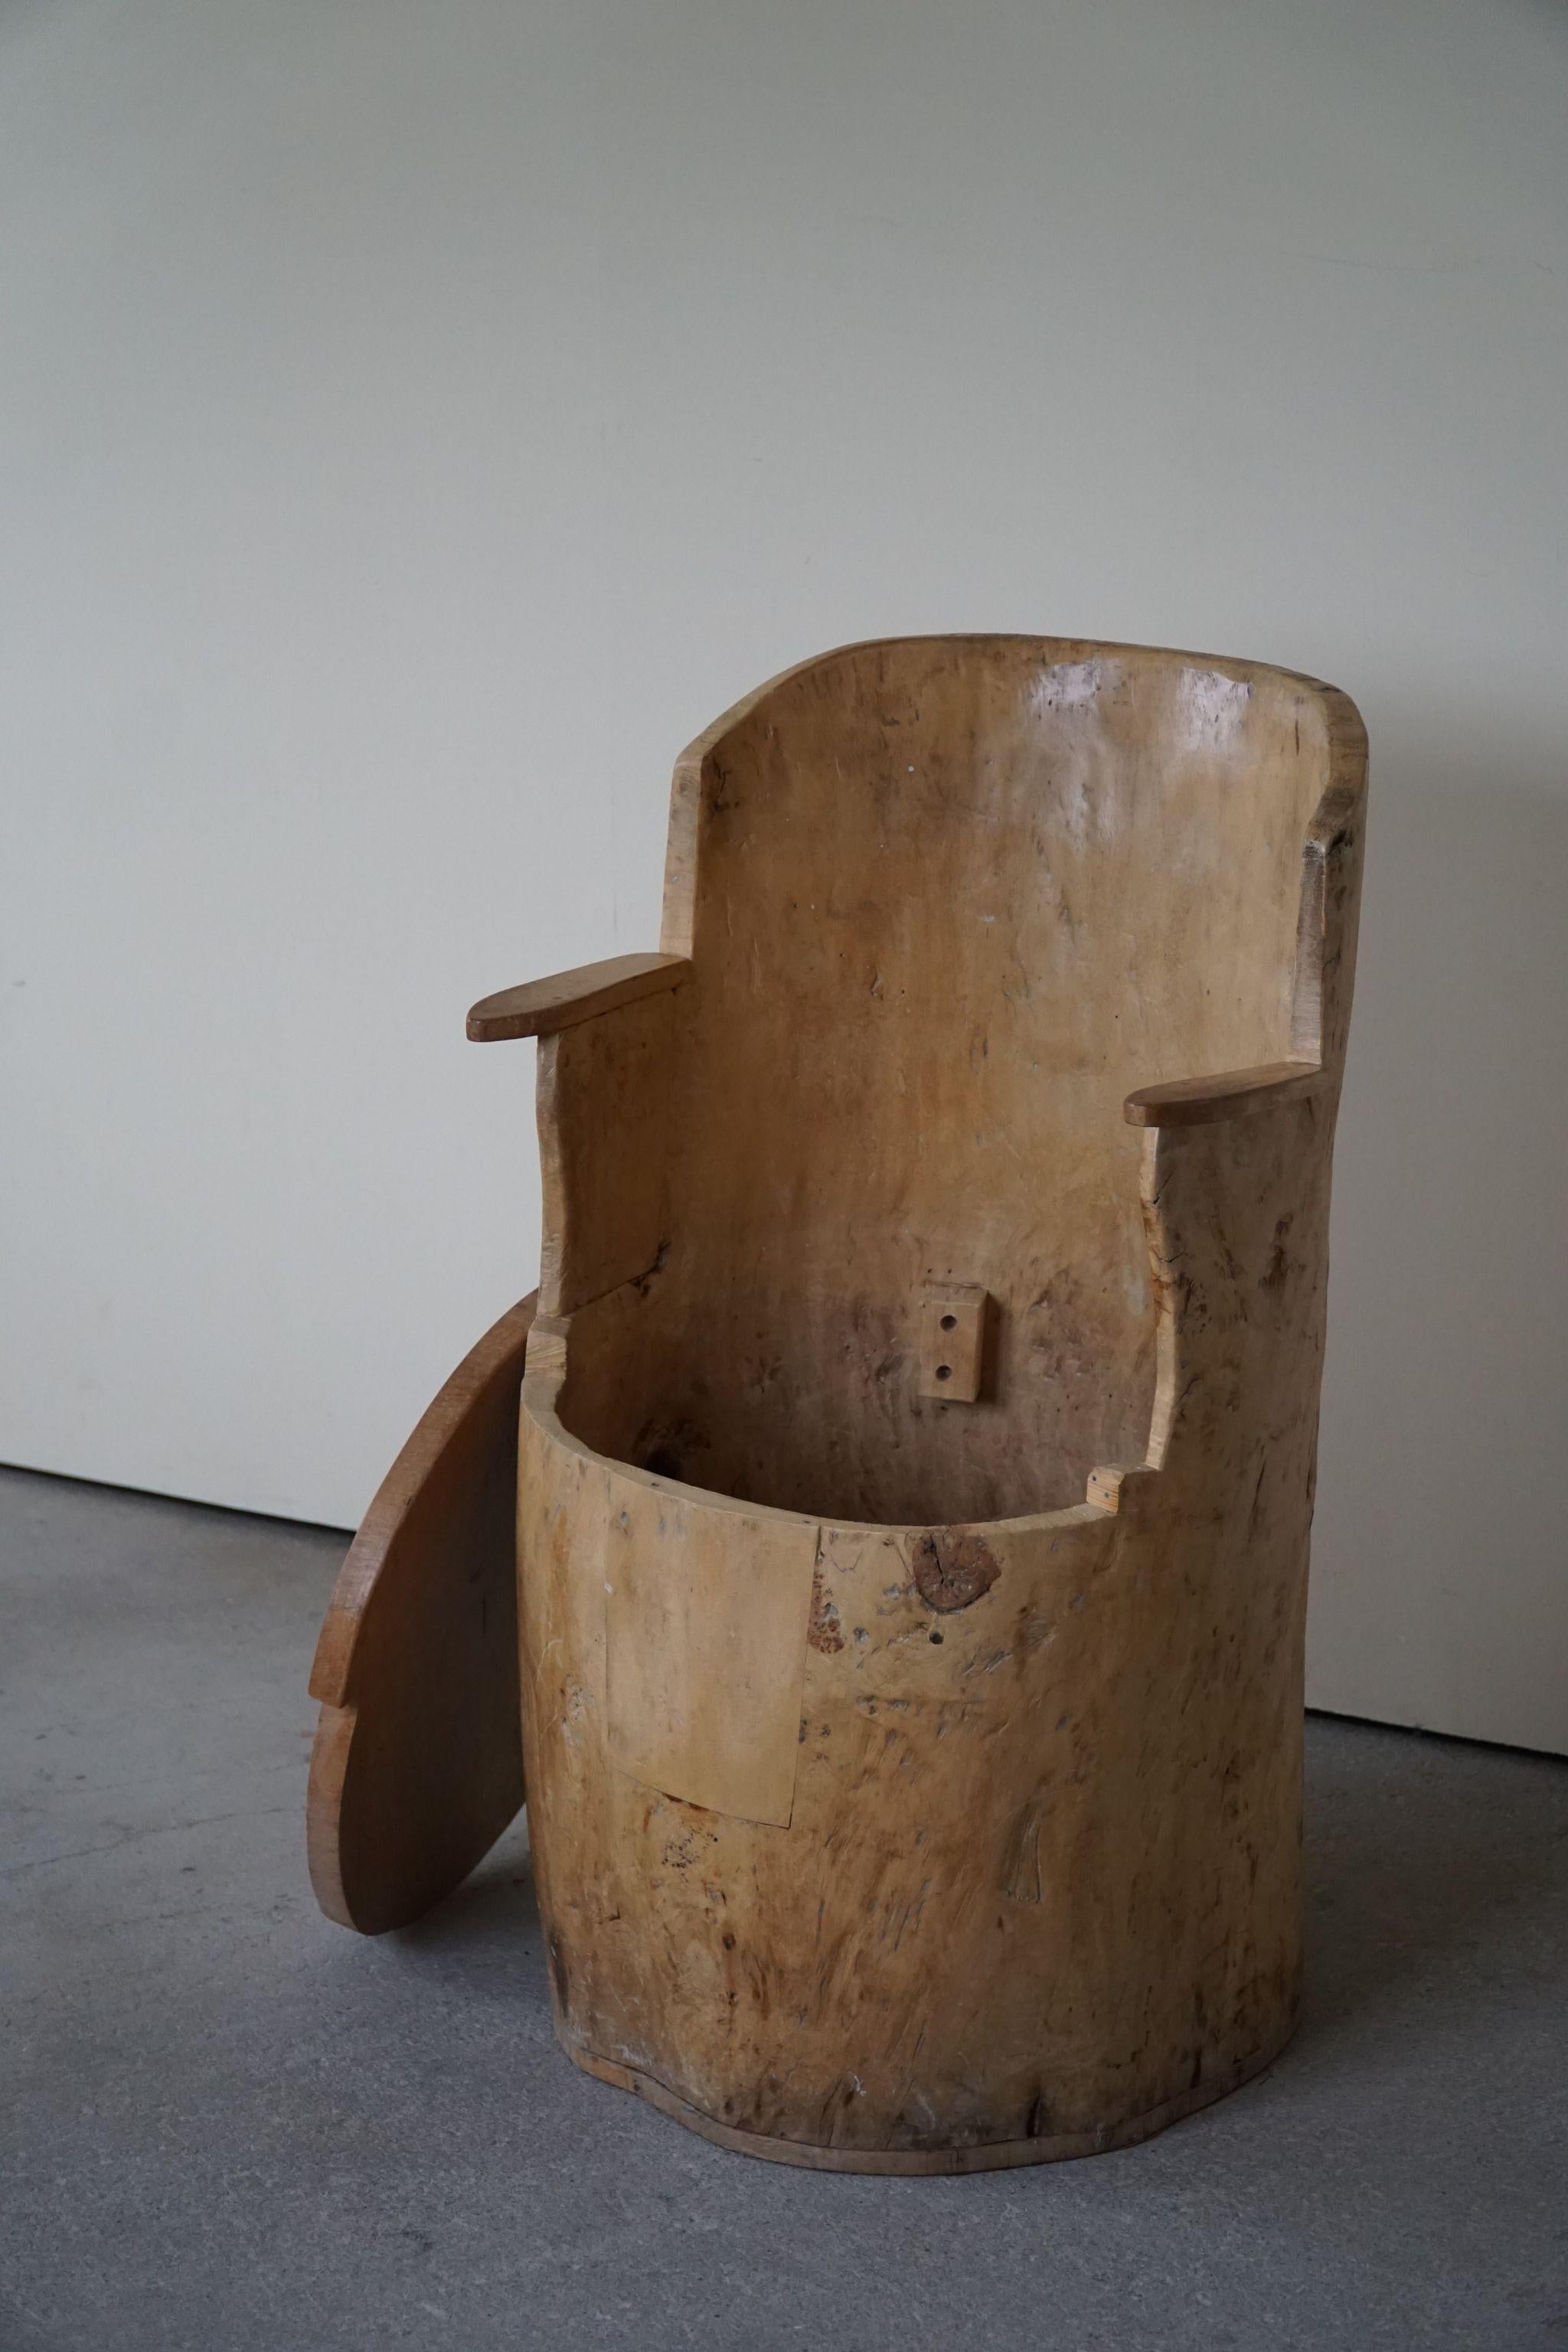 Hand-Carved Wabi Sabi Stump Chair in Solid Birch, by a Swedish Cabinetmaker, Modern, 1950s For Sale